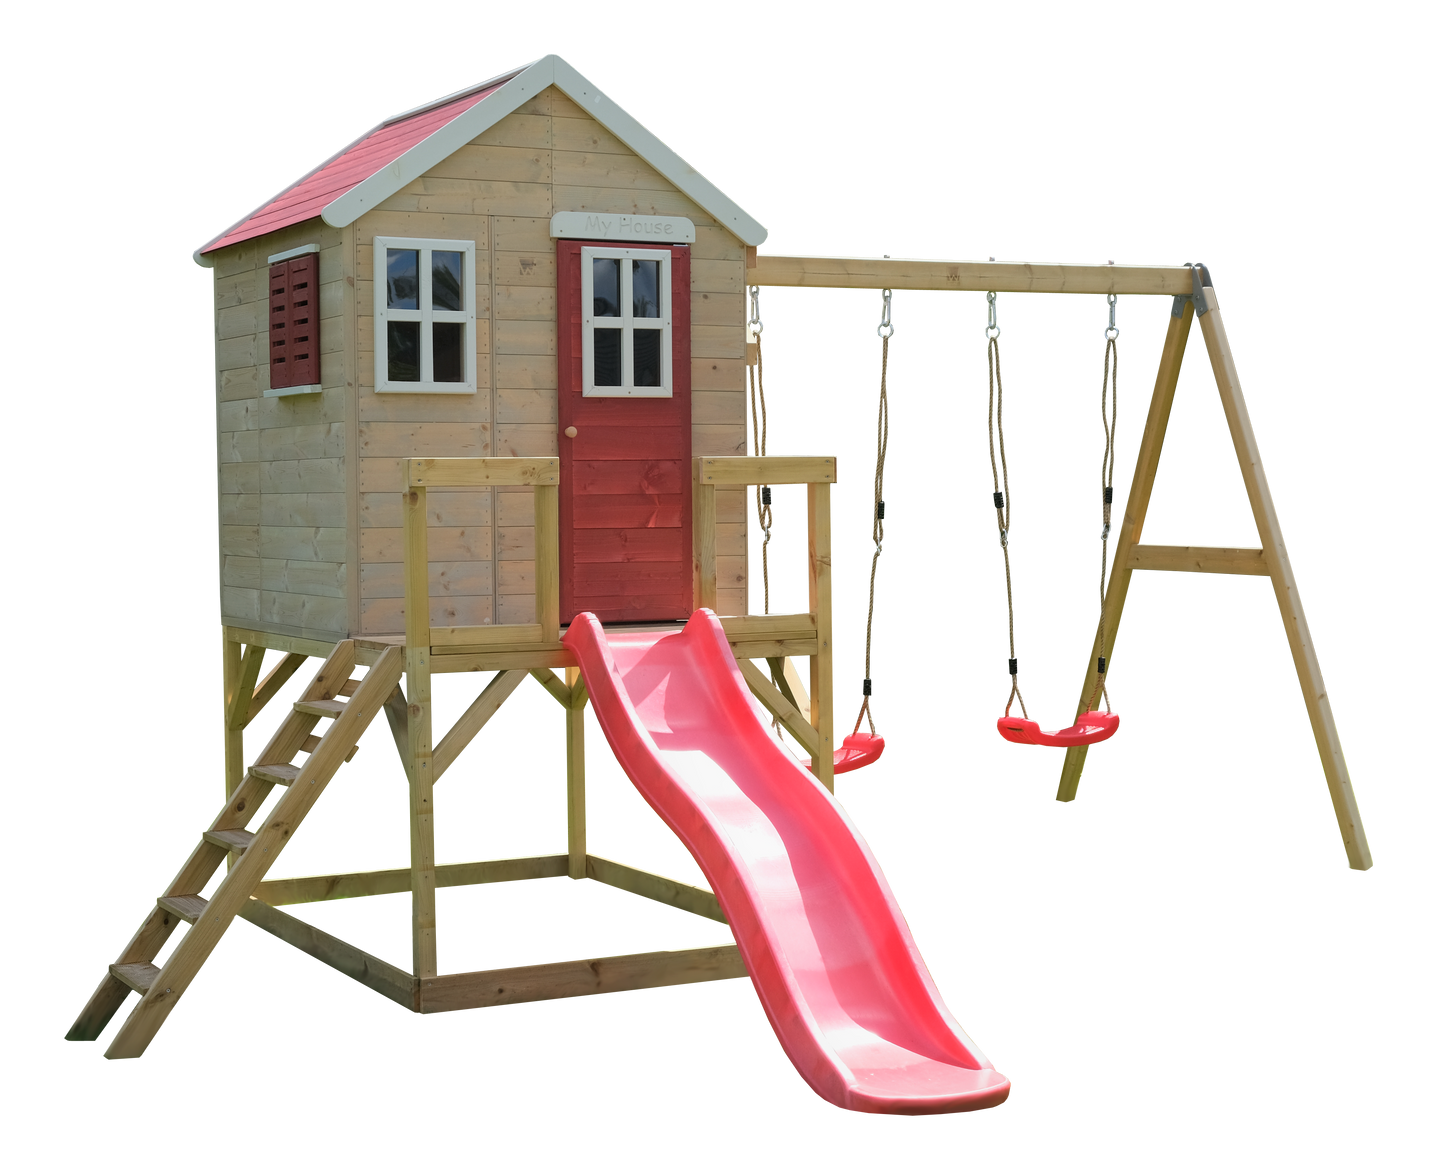 M28R Garden playhouse, wooden house on stilts with slide and double swing